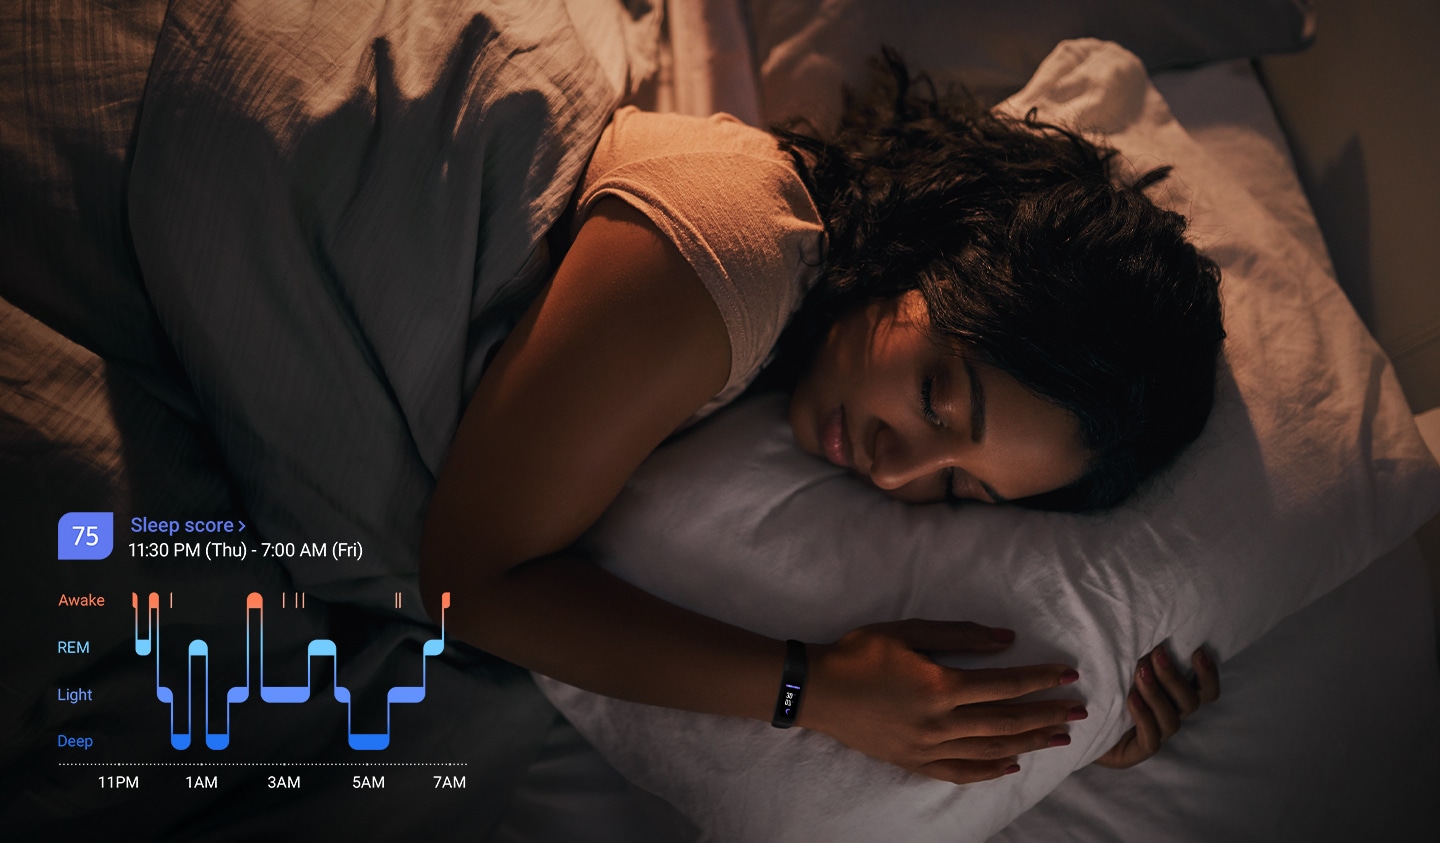 You can see a woman sleeping in bed with a Galaxy Fit2 and a graphic showing the REM sleep cycles in the lower left corner.